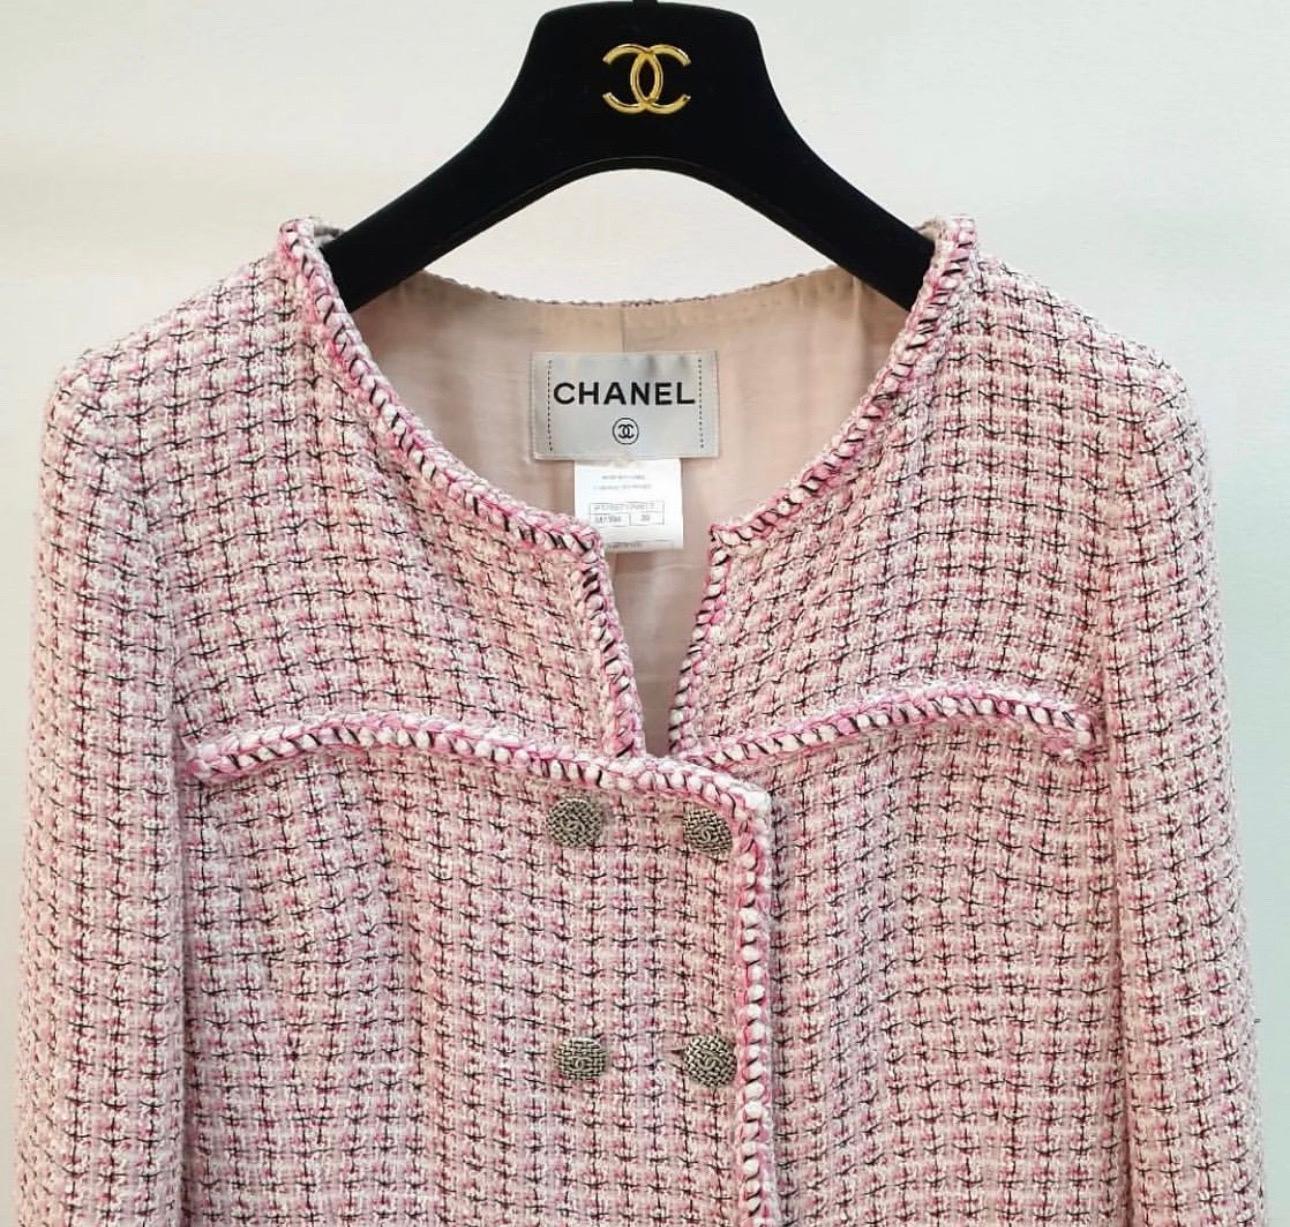 Chanel 14C Paris-Singapore Pink Tweed Jacket 
Sz.38 FR.  
Features braided trim, dual patch pockets, silver-toned CC buttons, camellia silk lining, and chain-weighted hem for perfect drape.
Very good condition. Slight dirtyness on the lining in